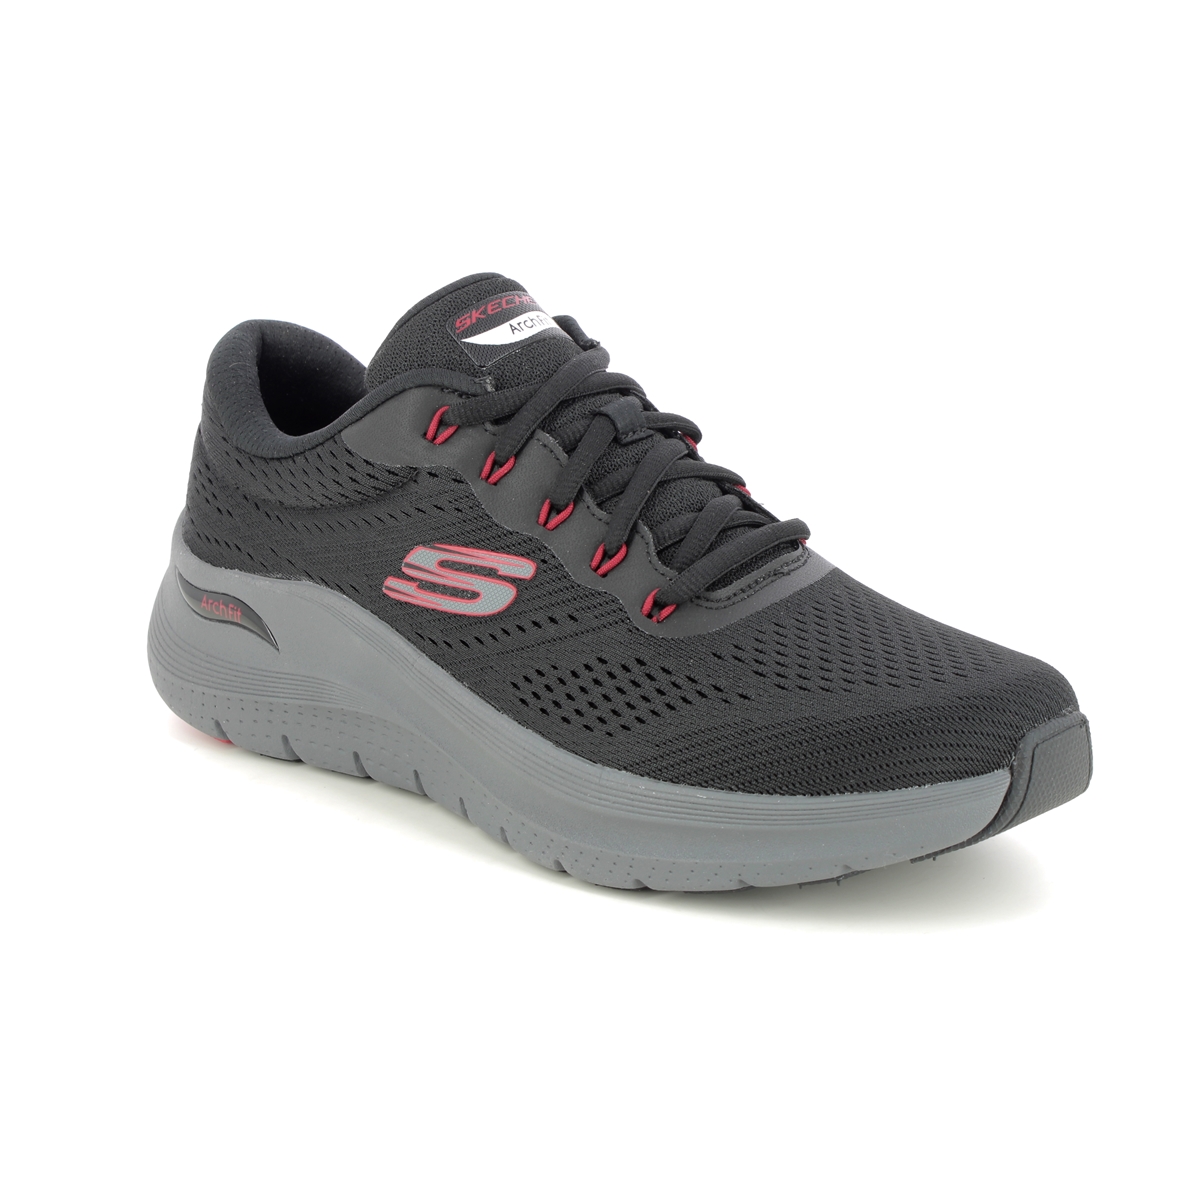 Skechers Arch Fit 2 Lace BKRD Black Red Mens trainers 232700 in a Plain Textile in Size 10